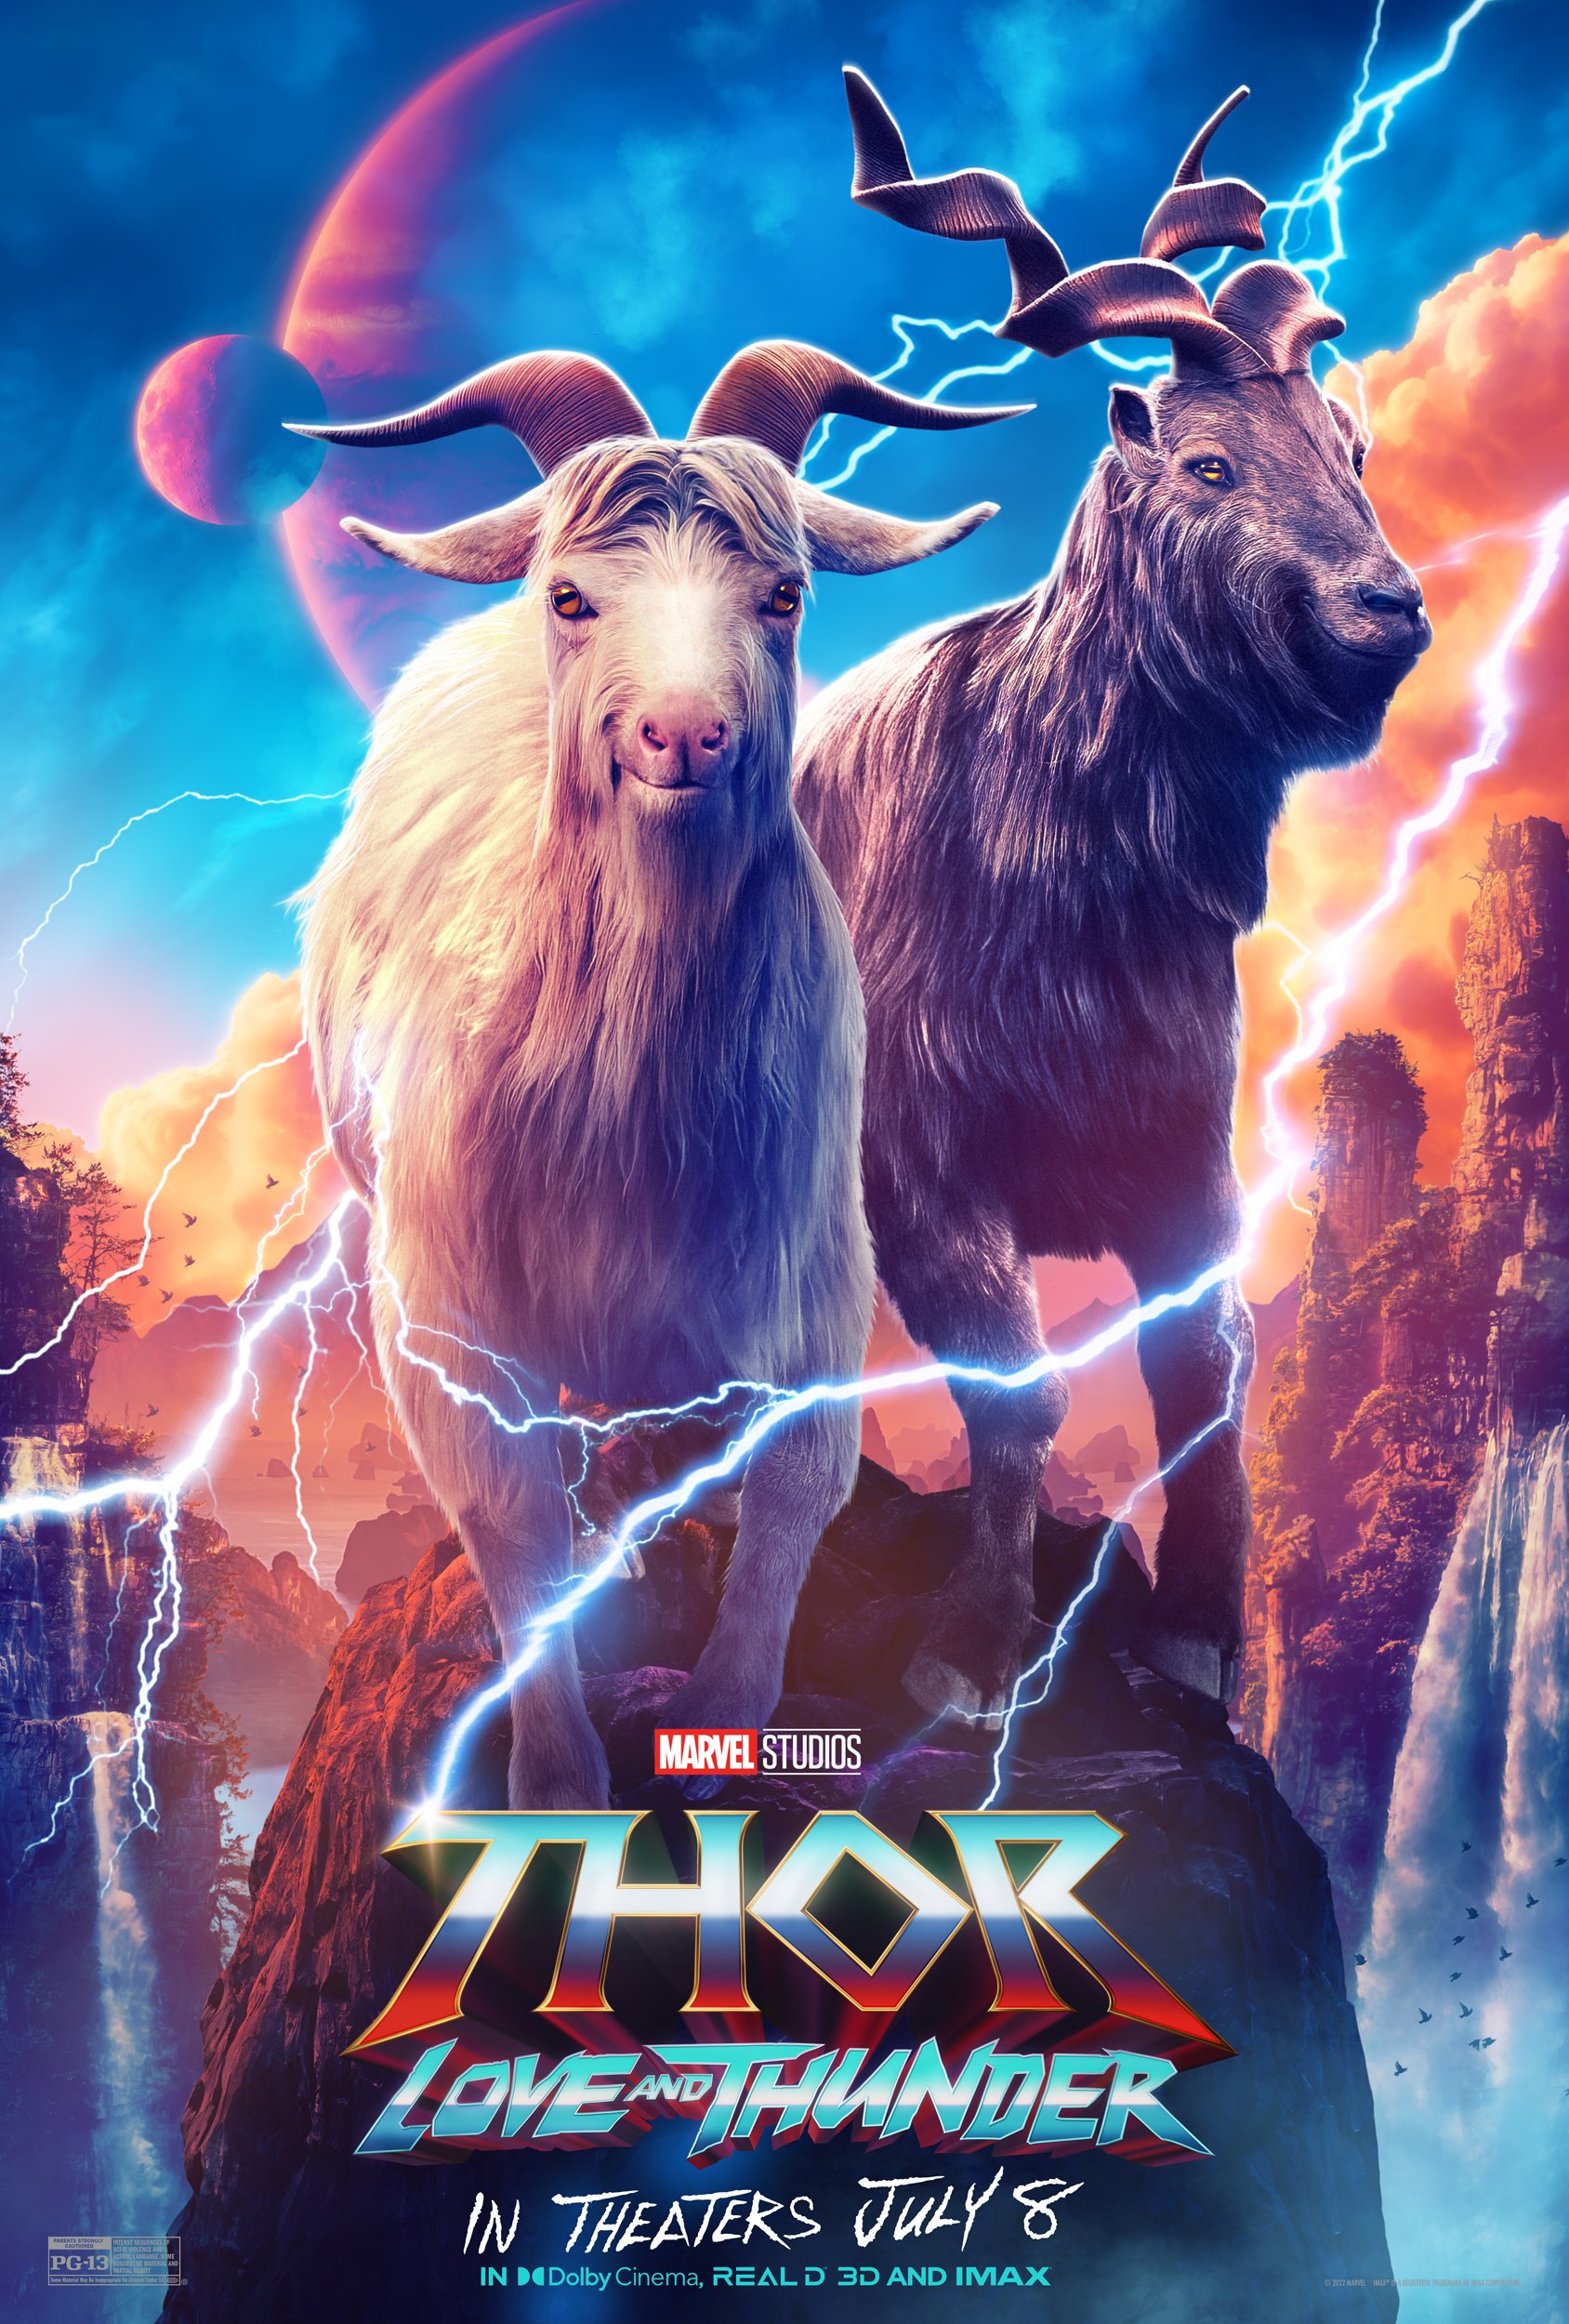 Thor: Love and Thunder Character Posters Feature Goats, Zeus, and More